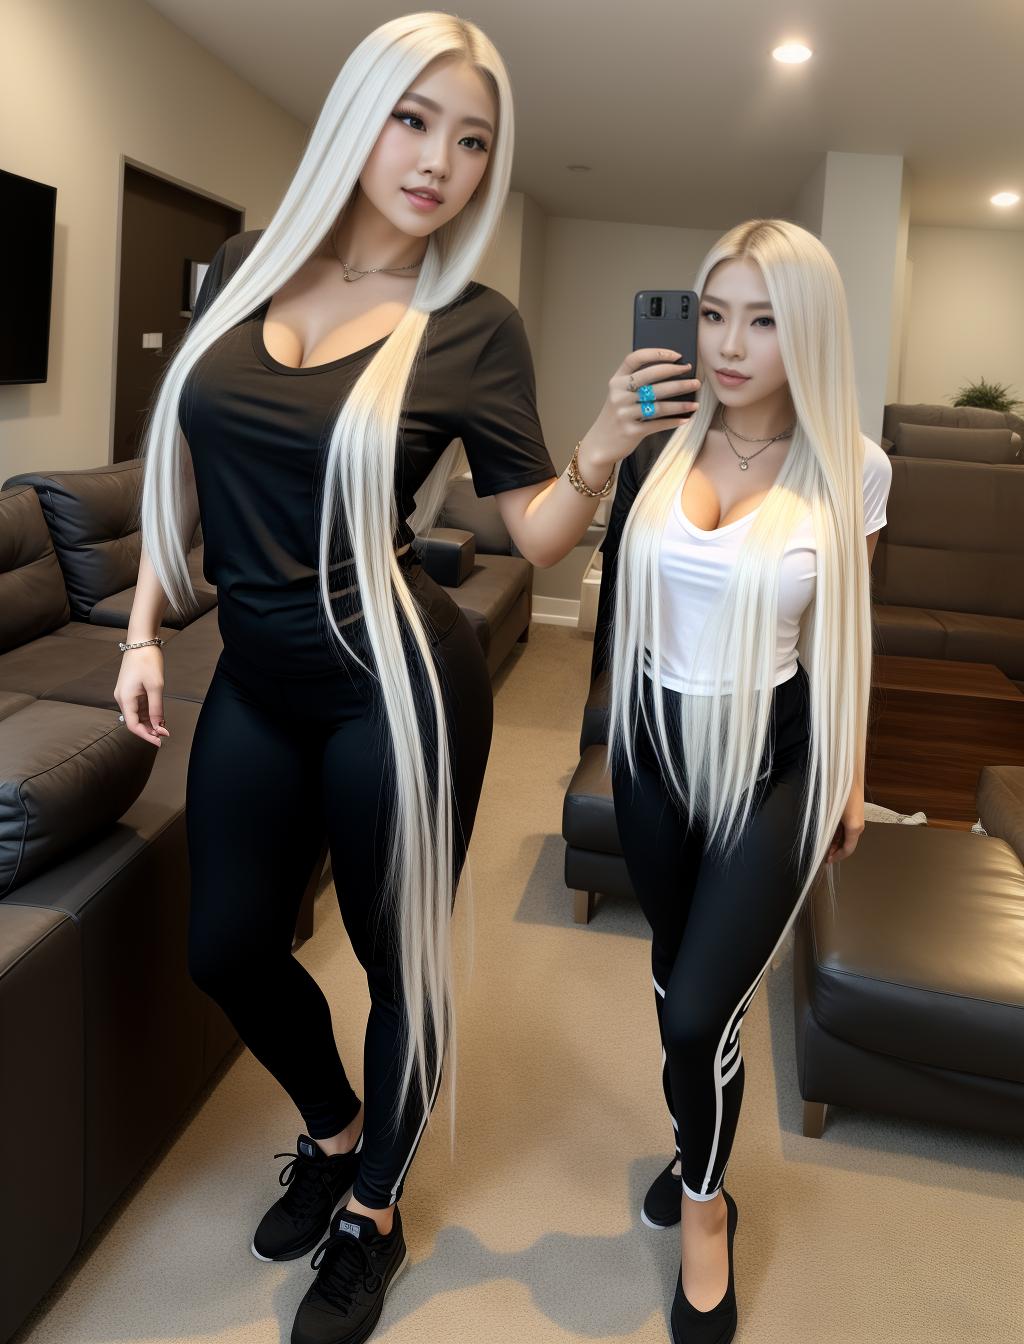  massively huge, expansion, massively huge, expansion, extremely skinny, long, very tall, long white hair, detailed face, short sleeve v-neck t-shirt, black leggings pants, at convention, selfie, full body in image, in public, standing, living room,